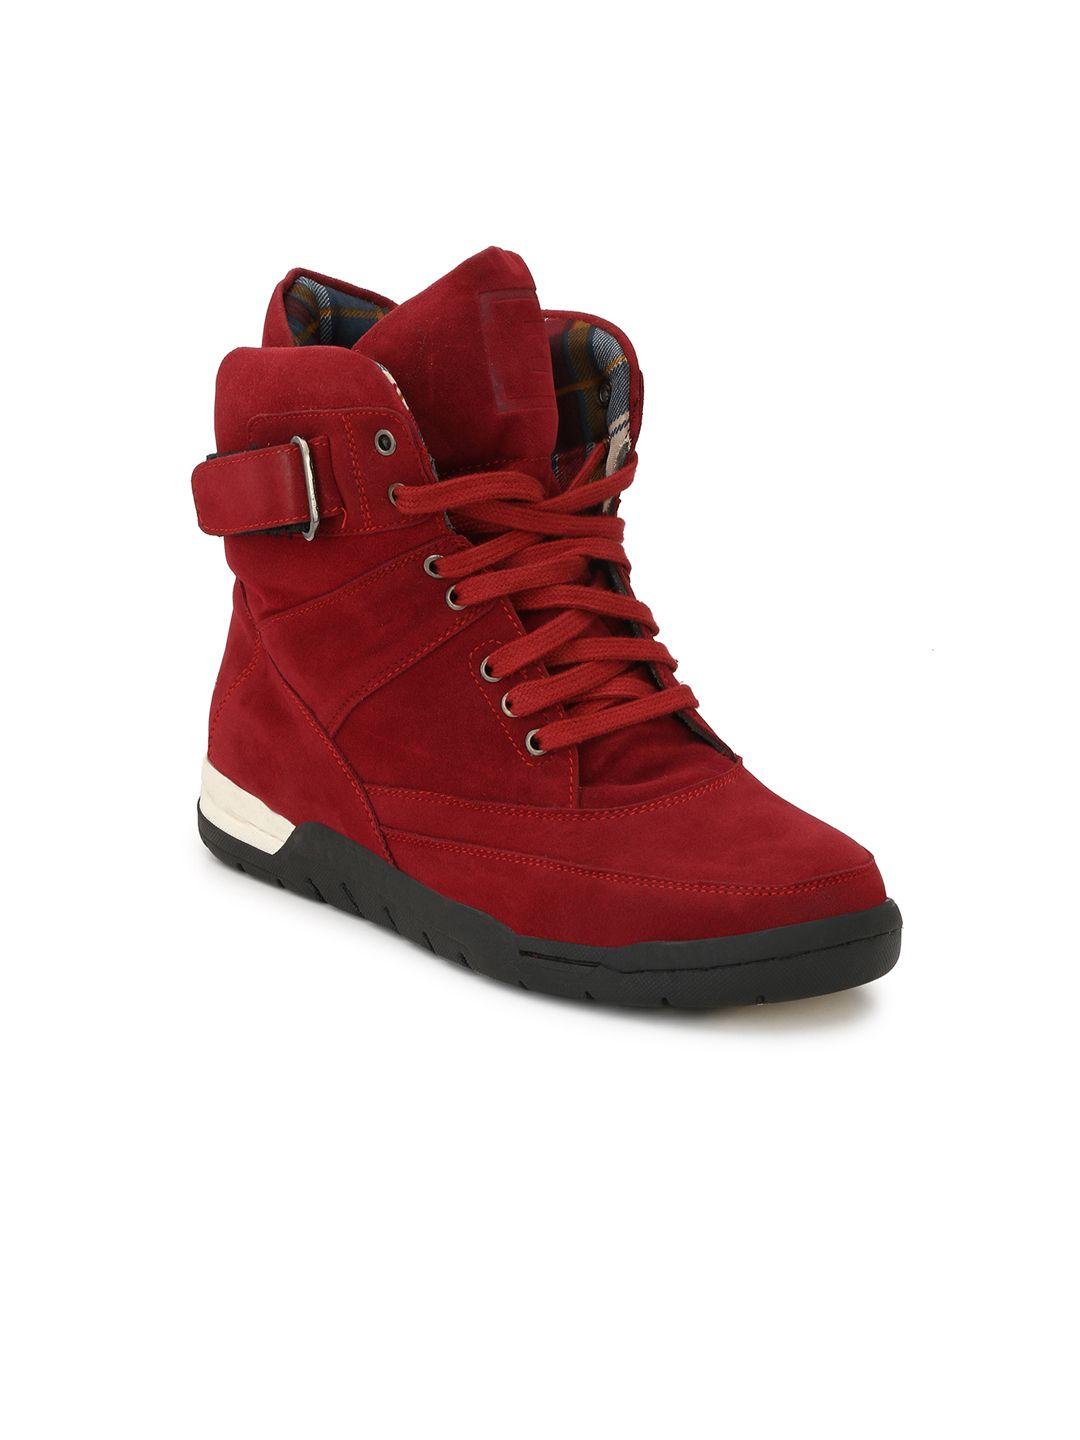 eego italy men red solid synthetic high-top flat boots